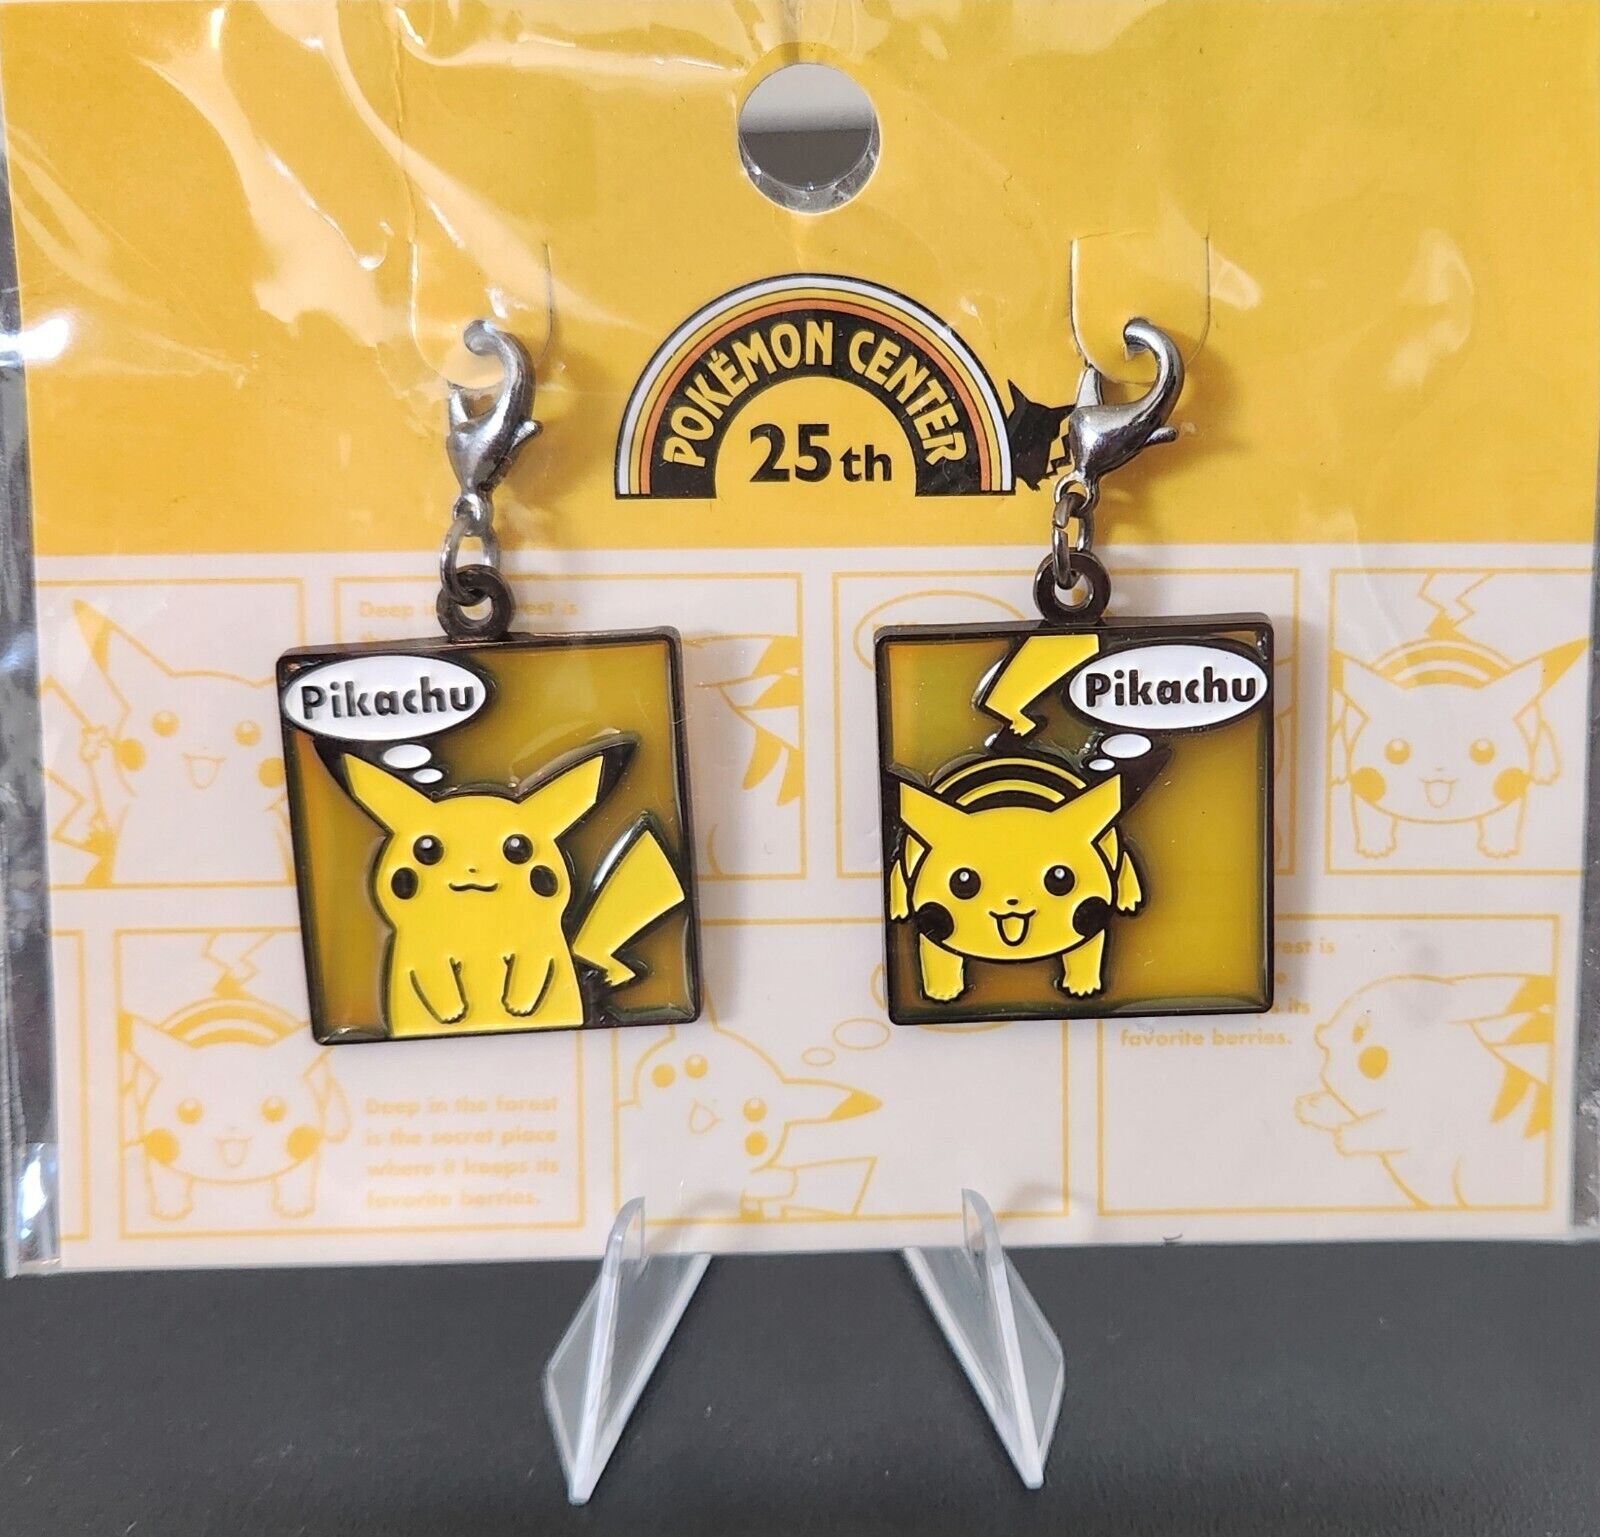 Pikachu Keychain Charm Set of 2 from Pokemon Center 25th Limited TCG prize table